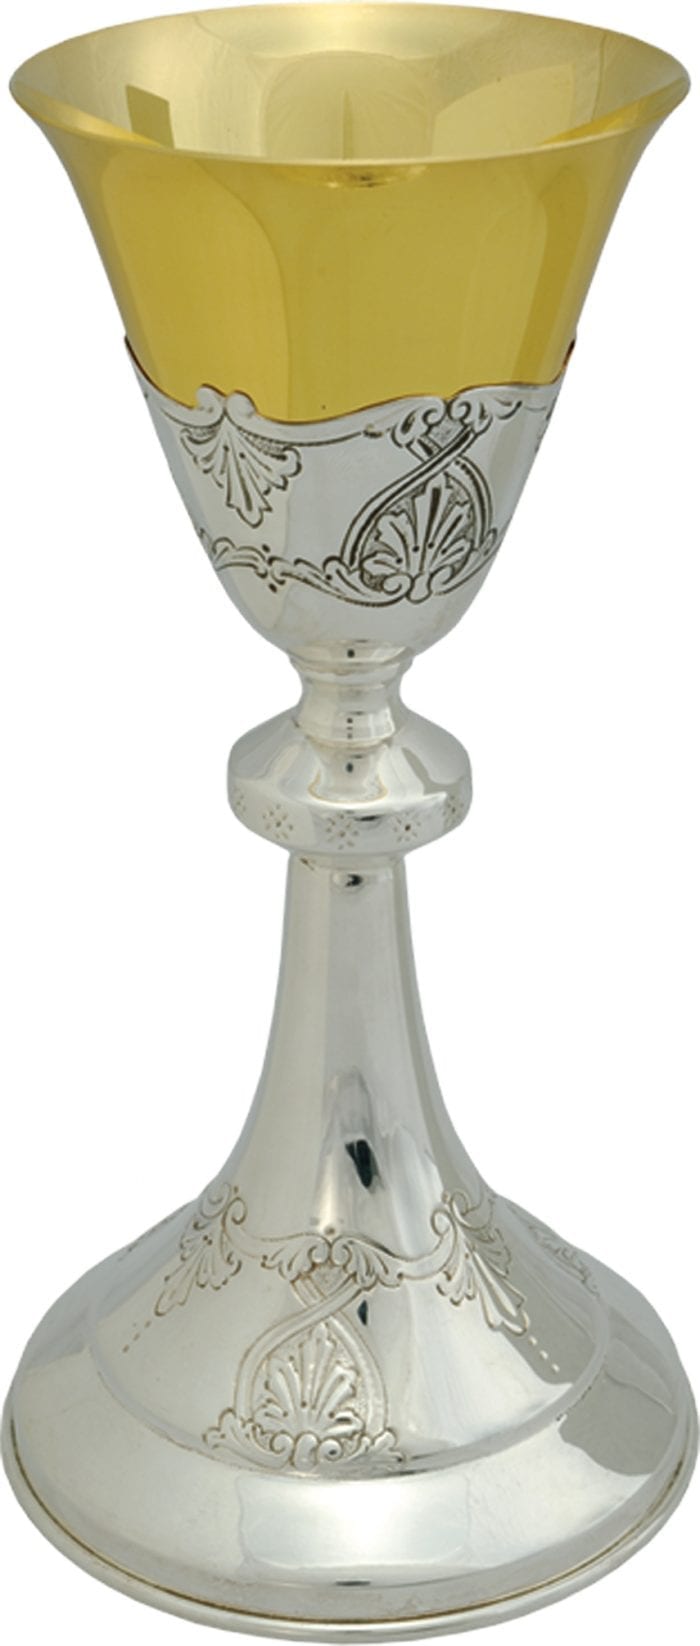 Glass "Giglio" Maranatha Lab classic silver style with hand chiseled gold cup interior with floral decorations